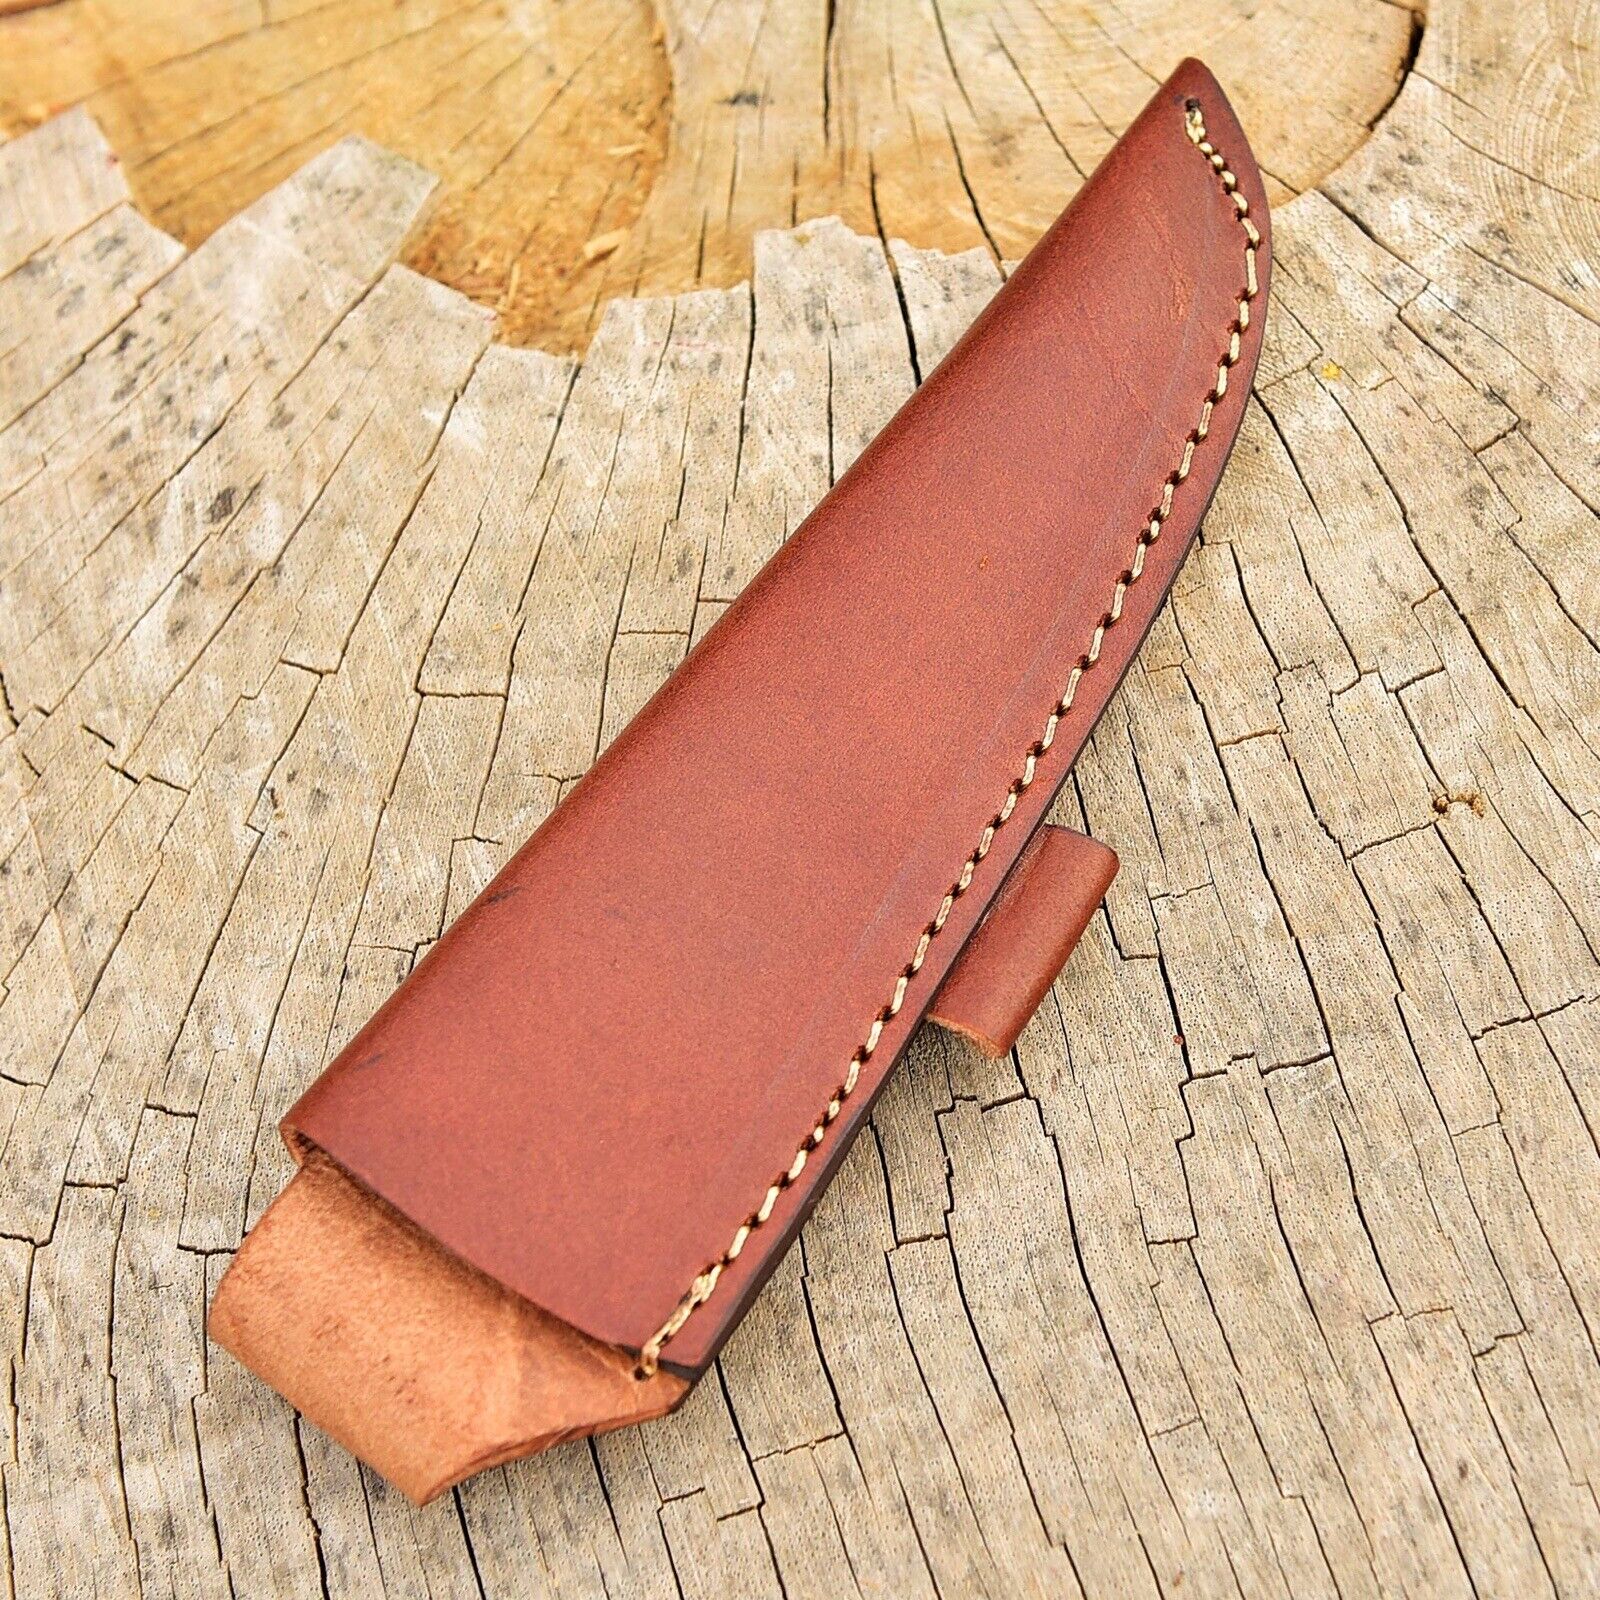 Leather Hand Crafted SHEATH Holster FIXED BLADE KNIFE SHARPENING STICK HOLDER